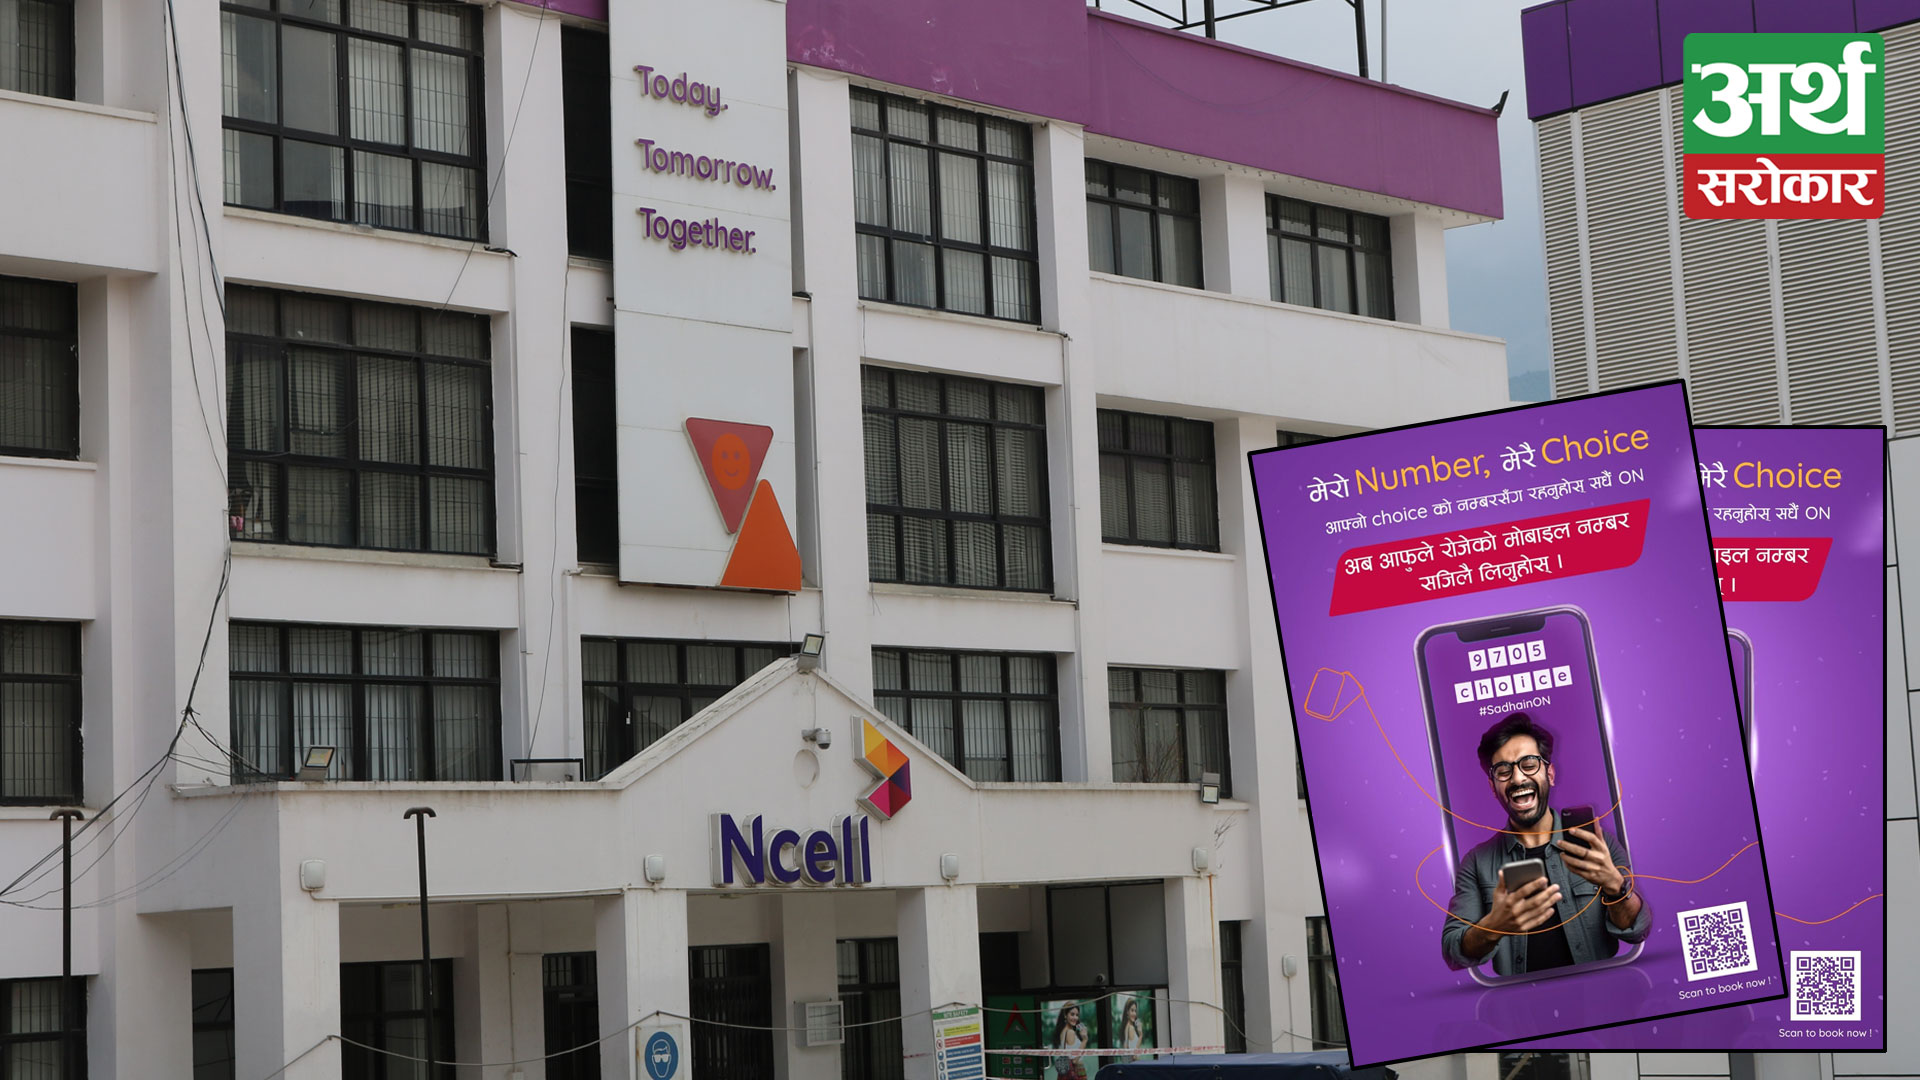 Stay ‘Sadhain ON’ with the mobile number of your choice: Ncell